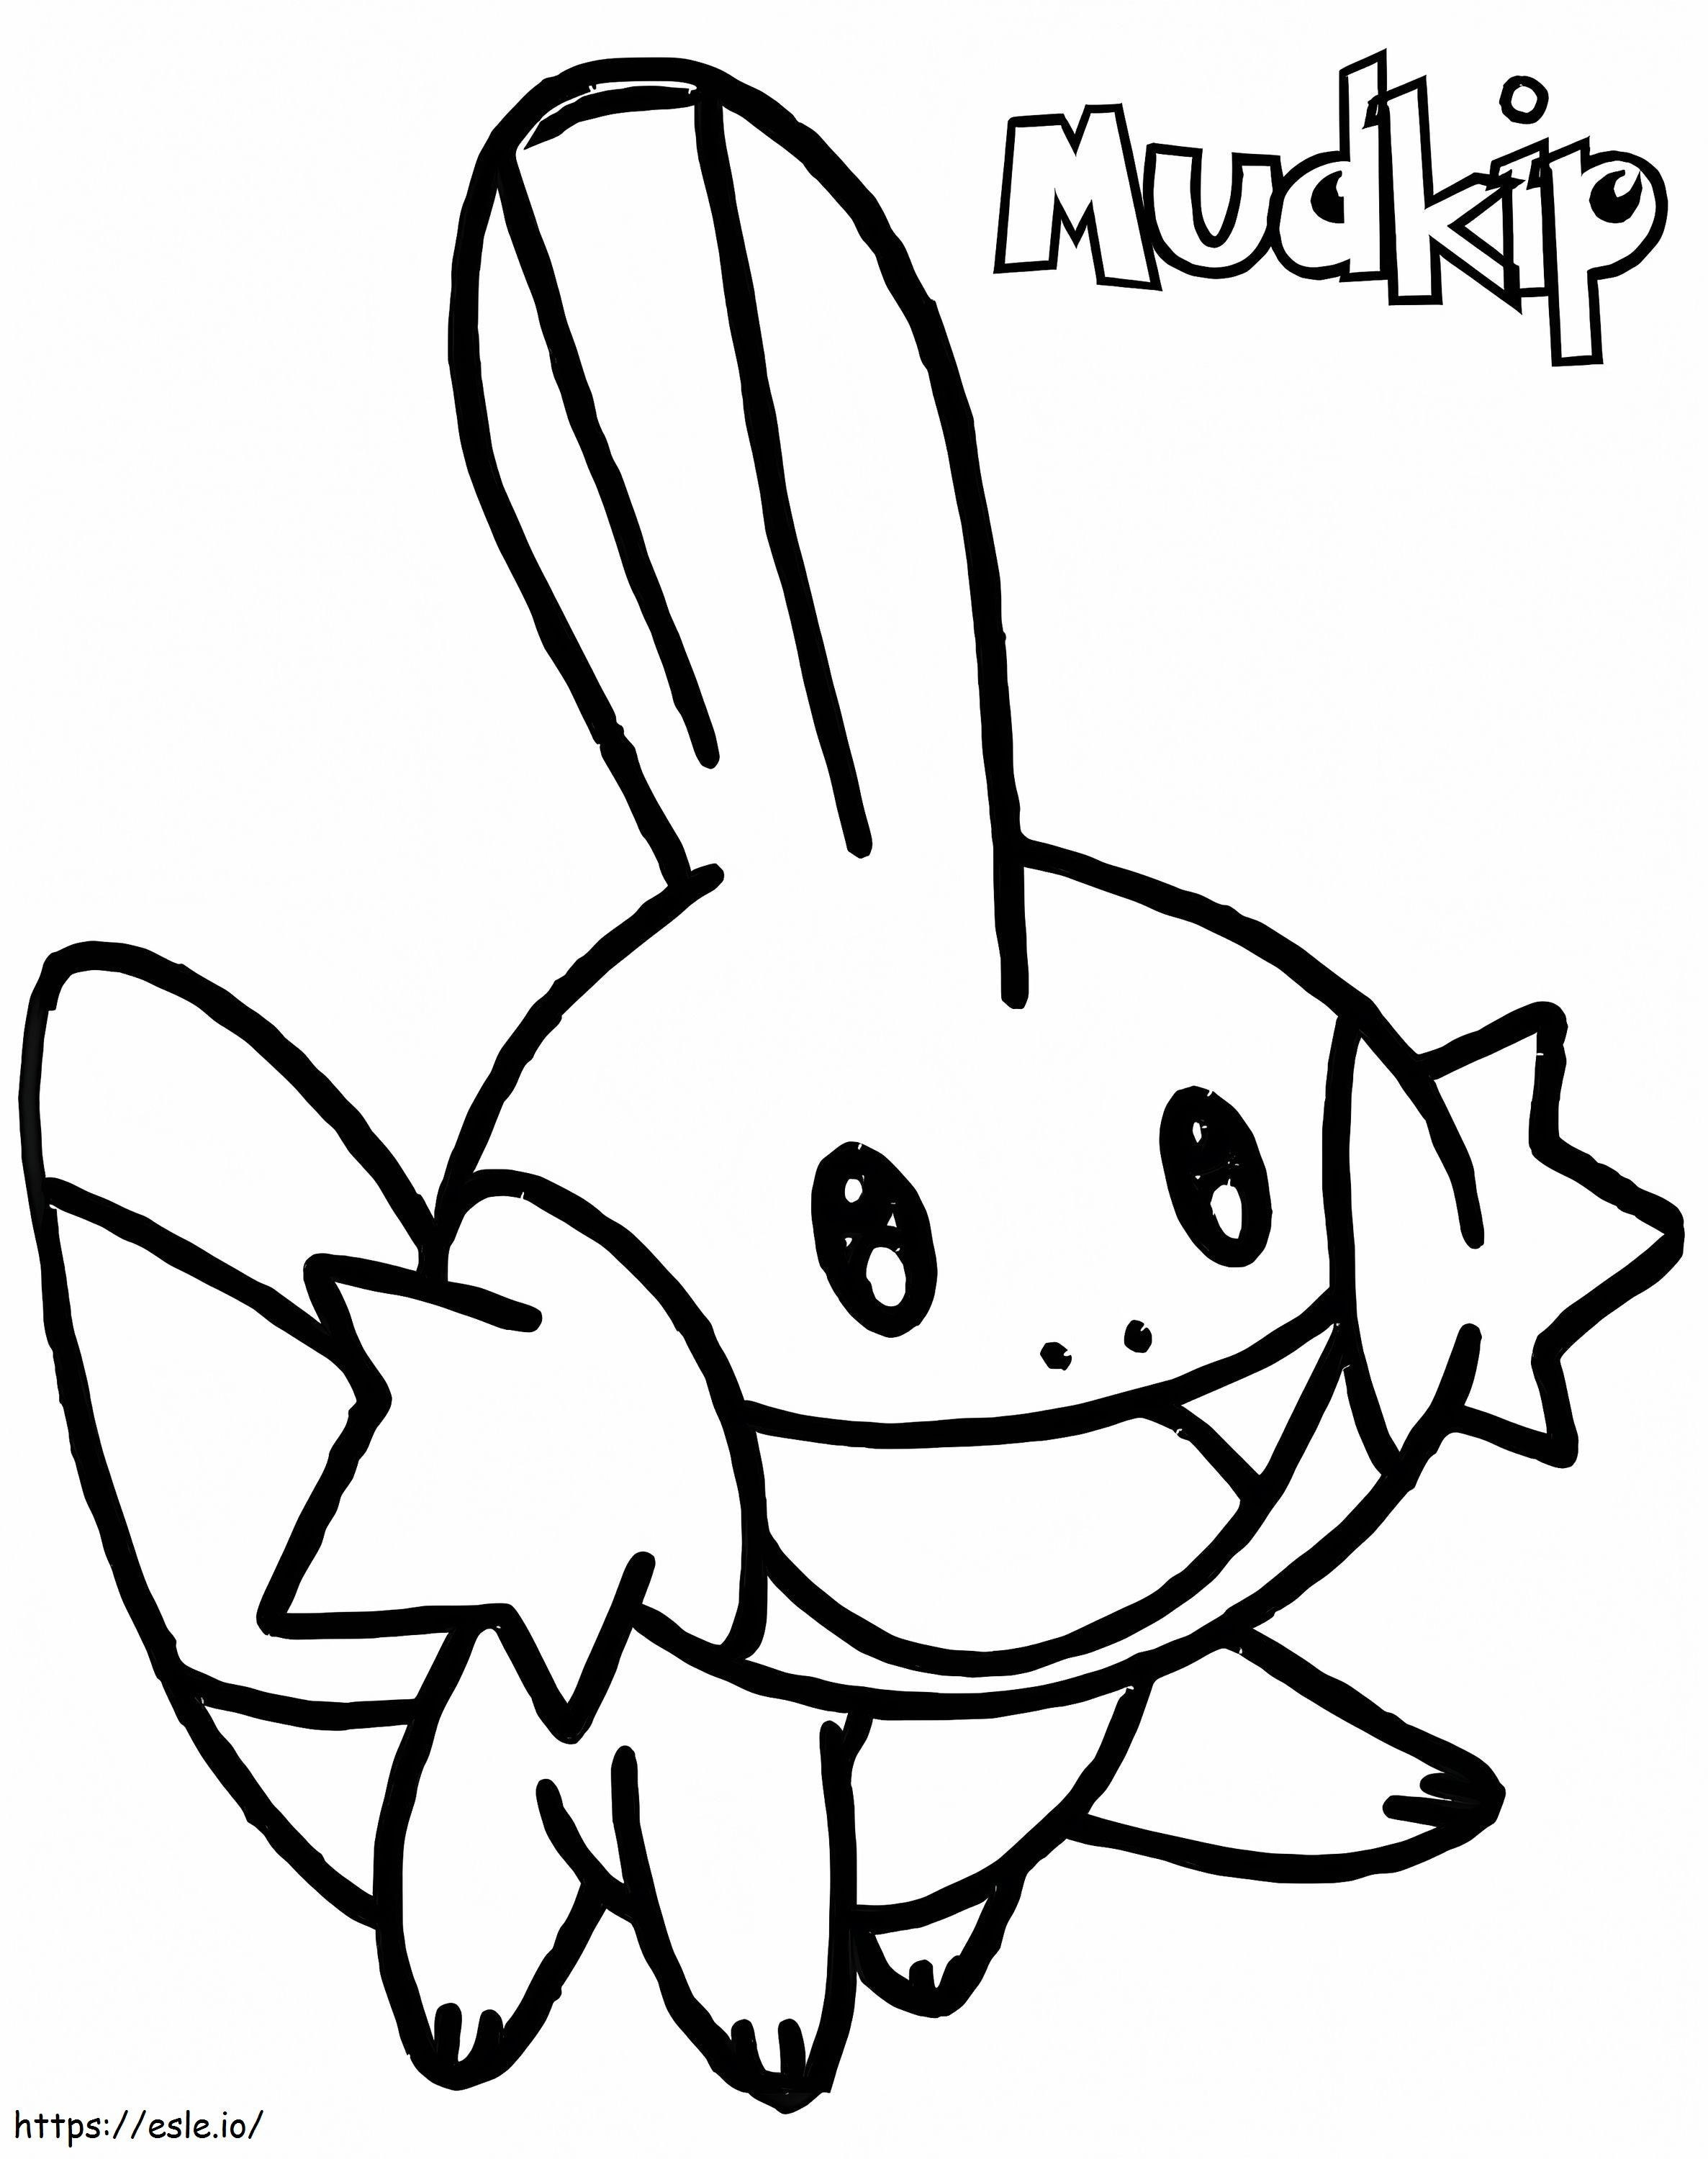 Happy Mudkip coloring page